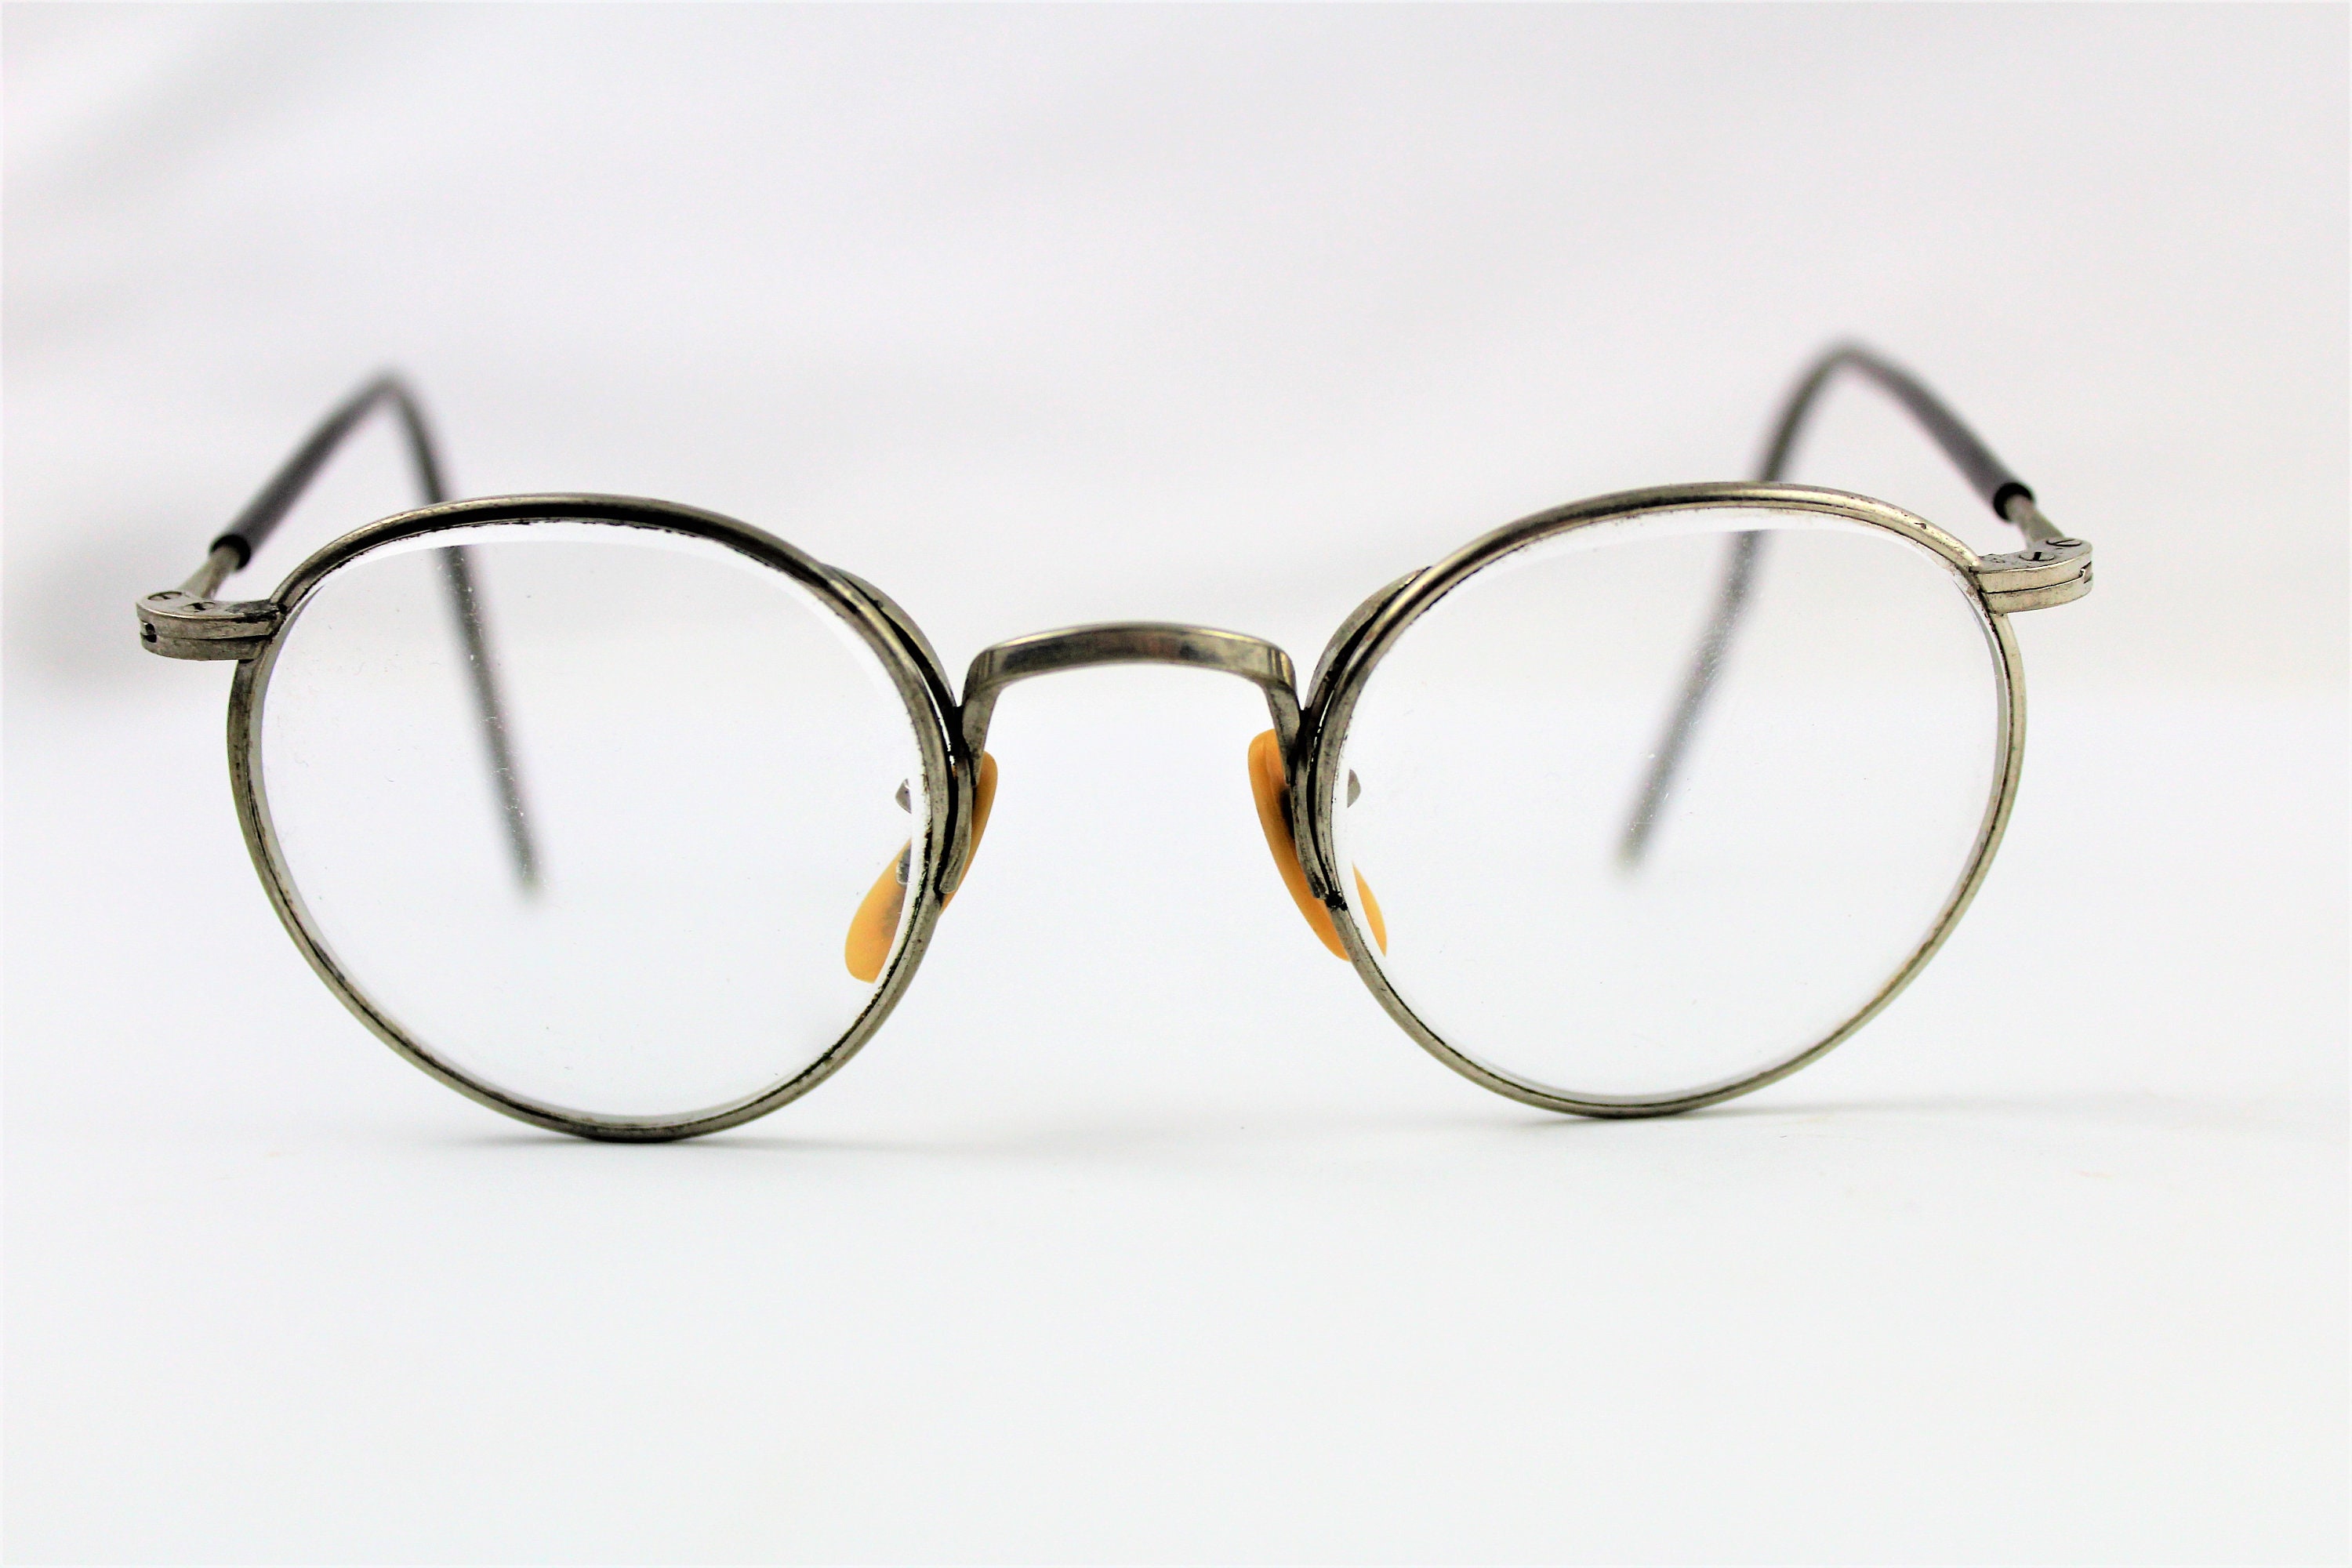 Vintage Safety Glasses, Bausch Lomb Clear View Safety Glasses, 1950s